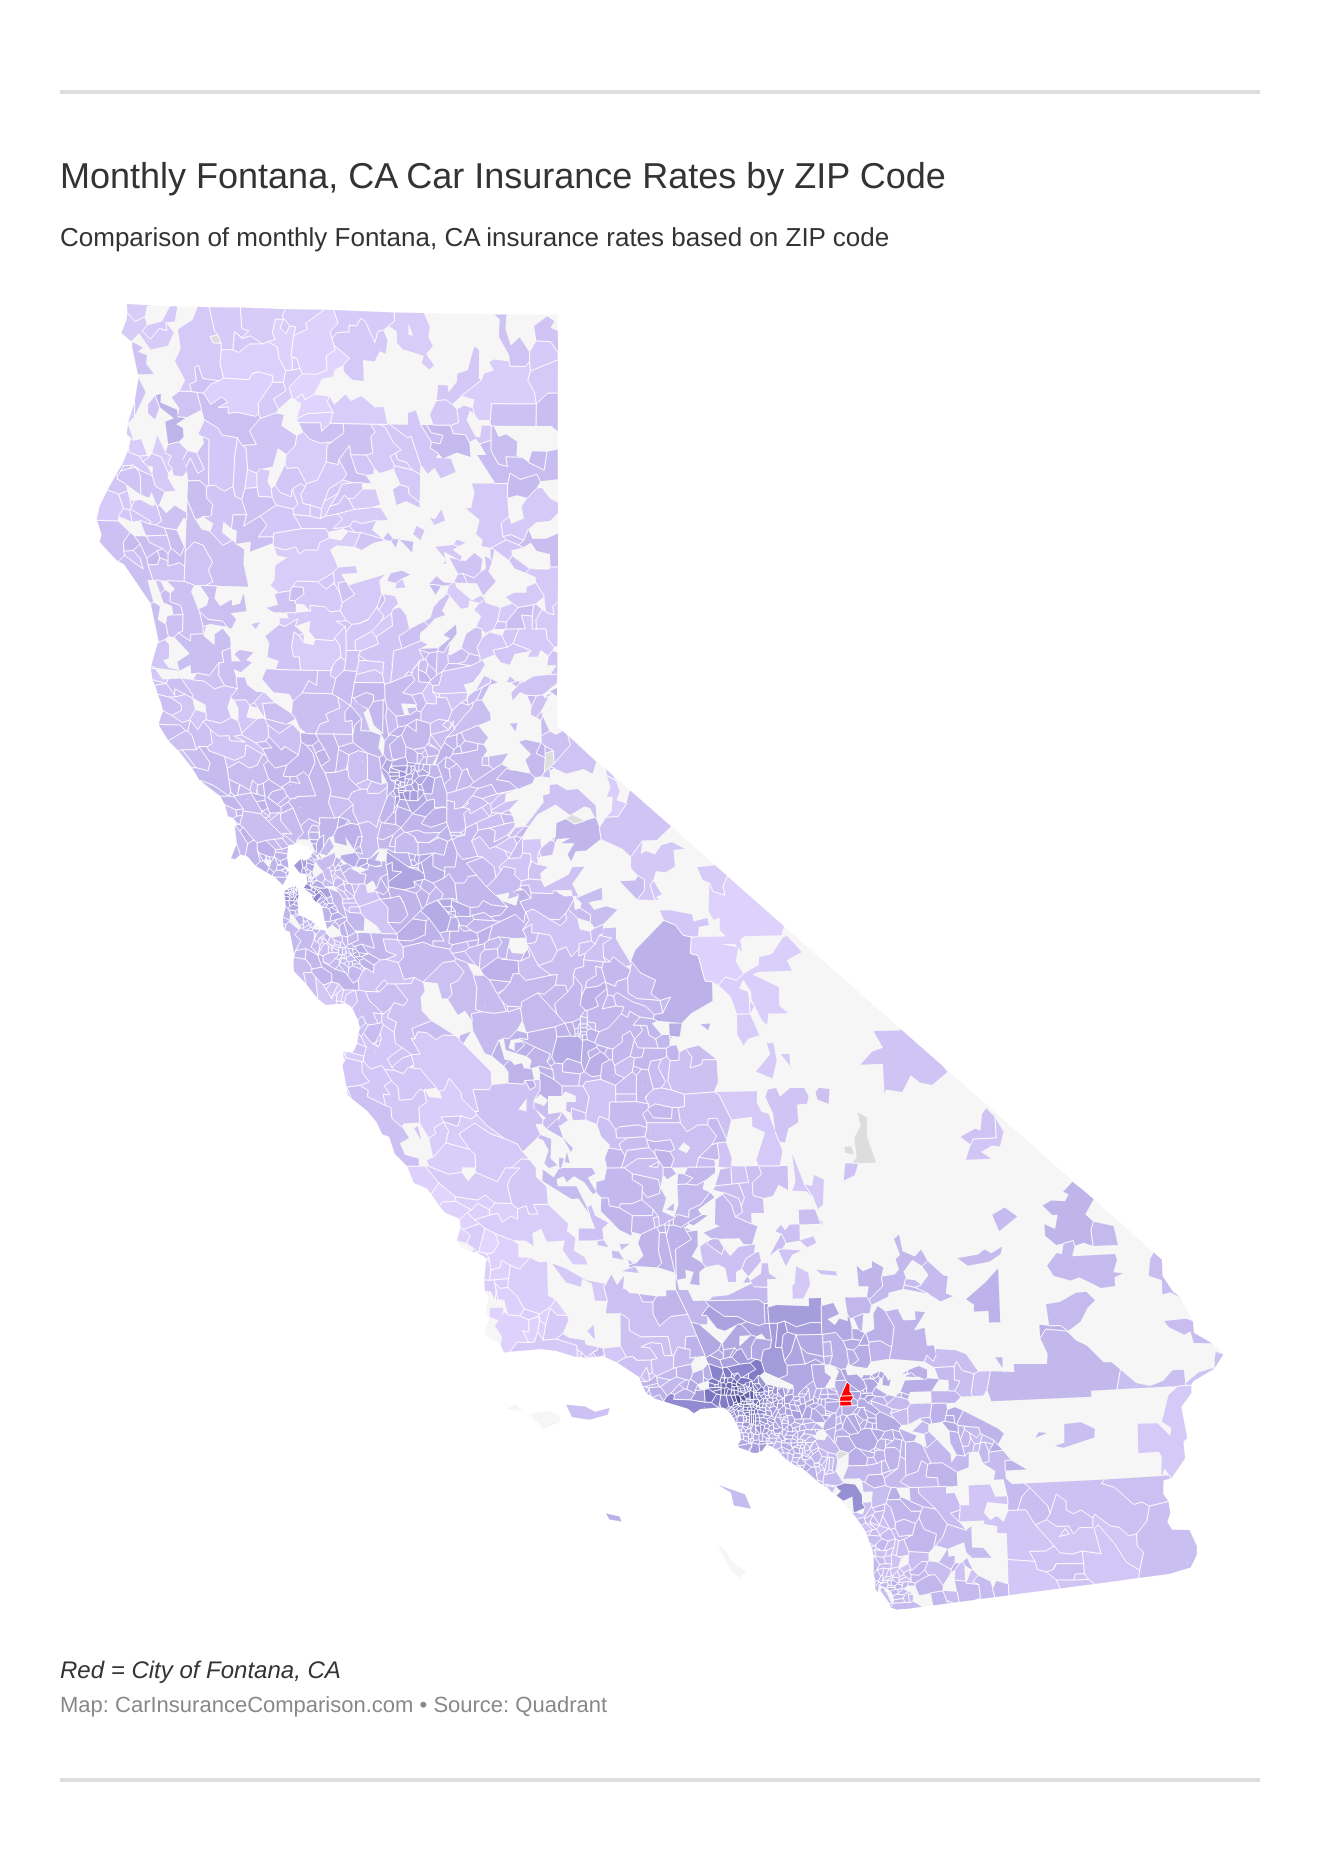 Monthly Fontana, CA Car Insurance Rates by ZIP Code